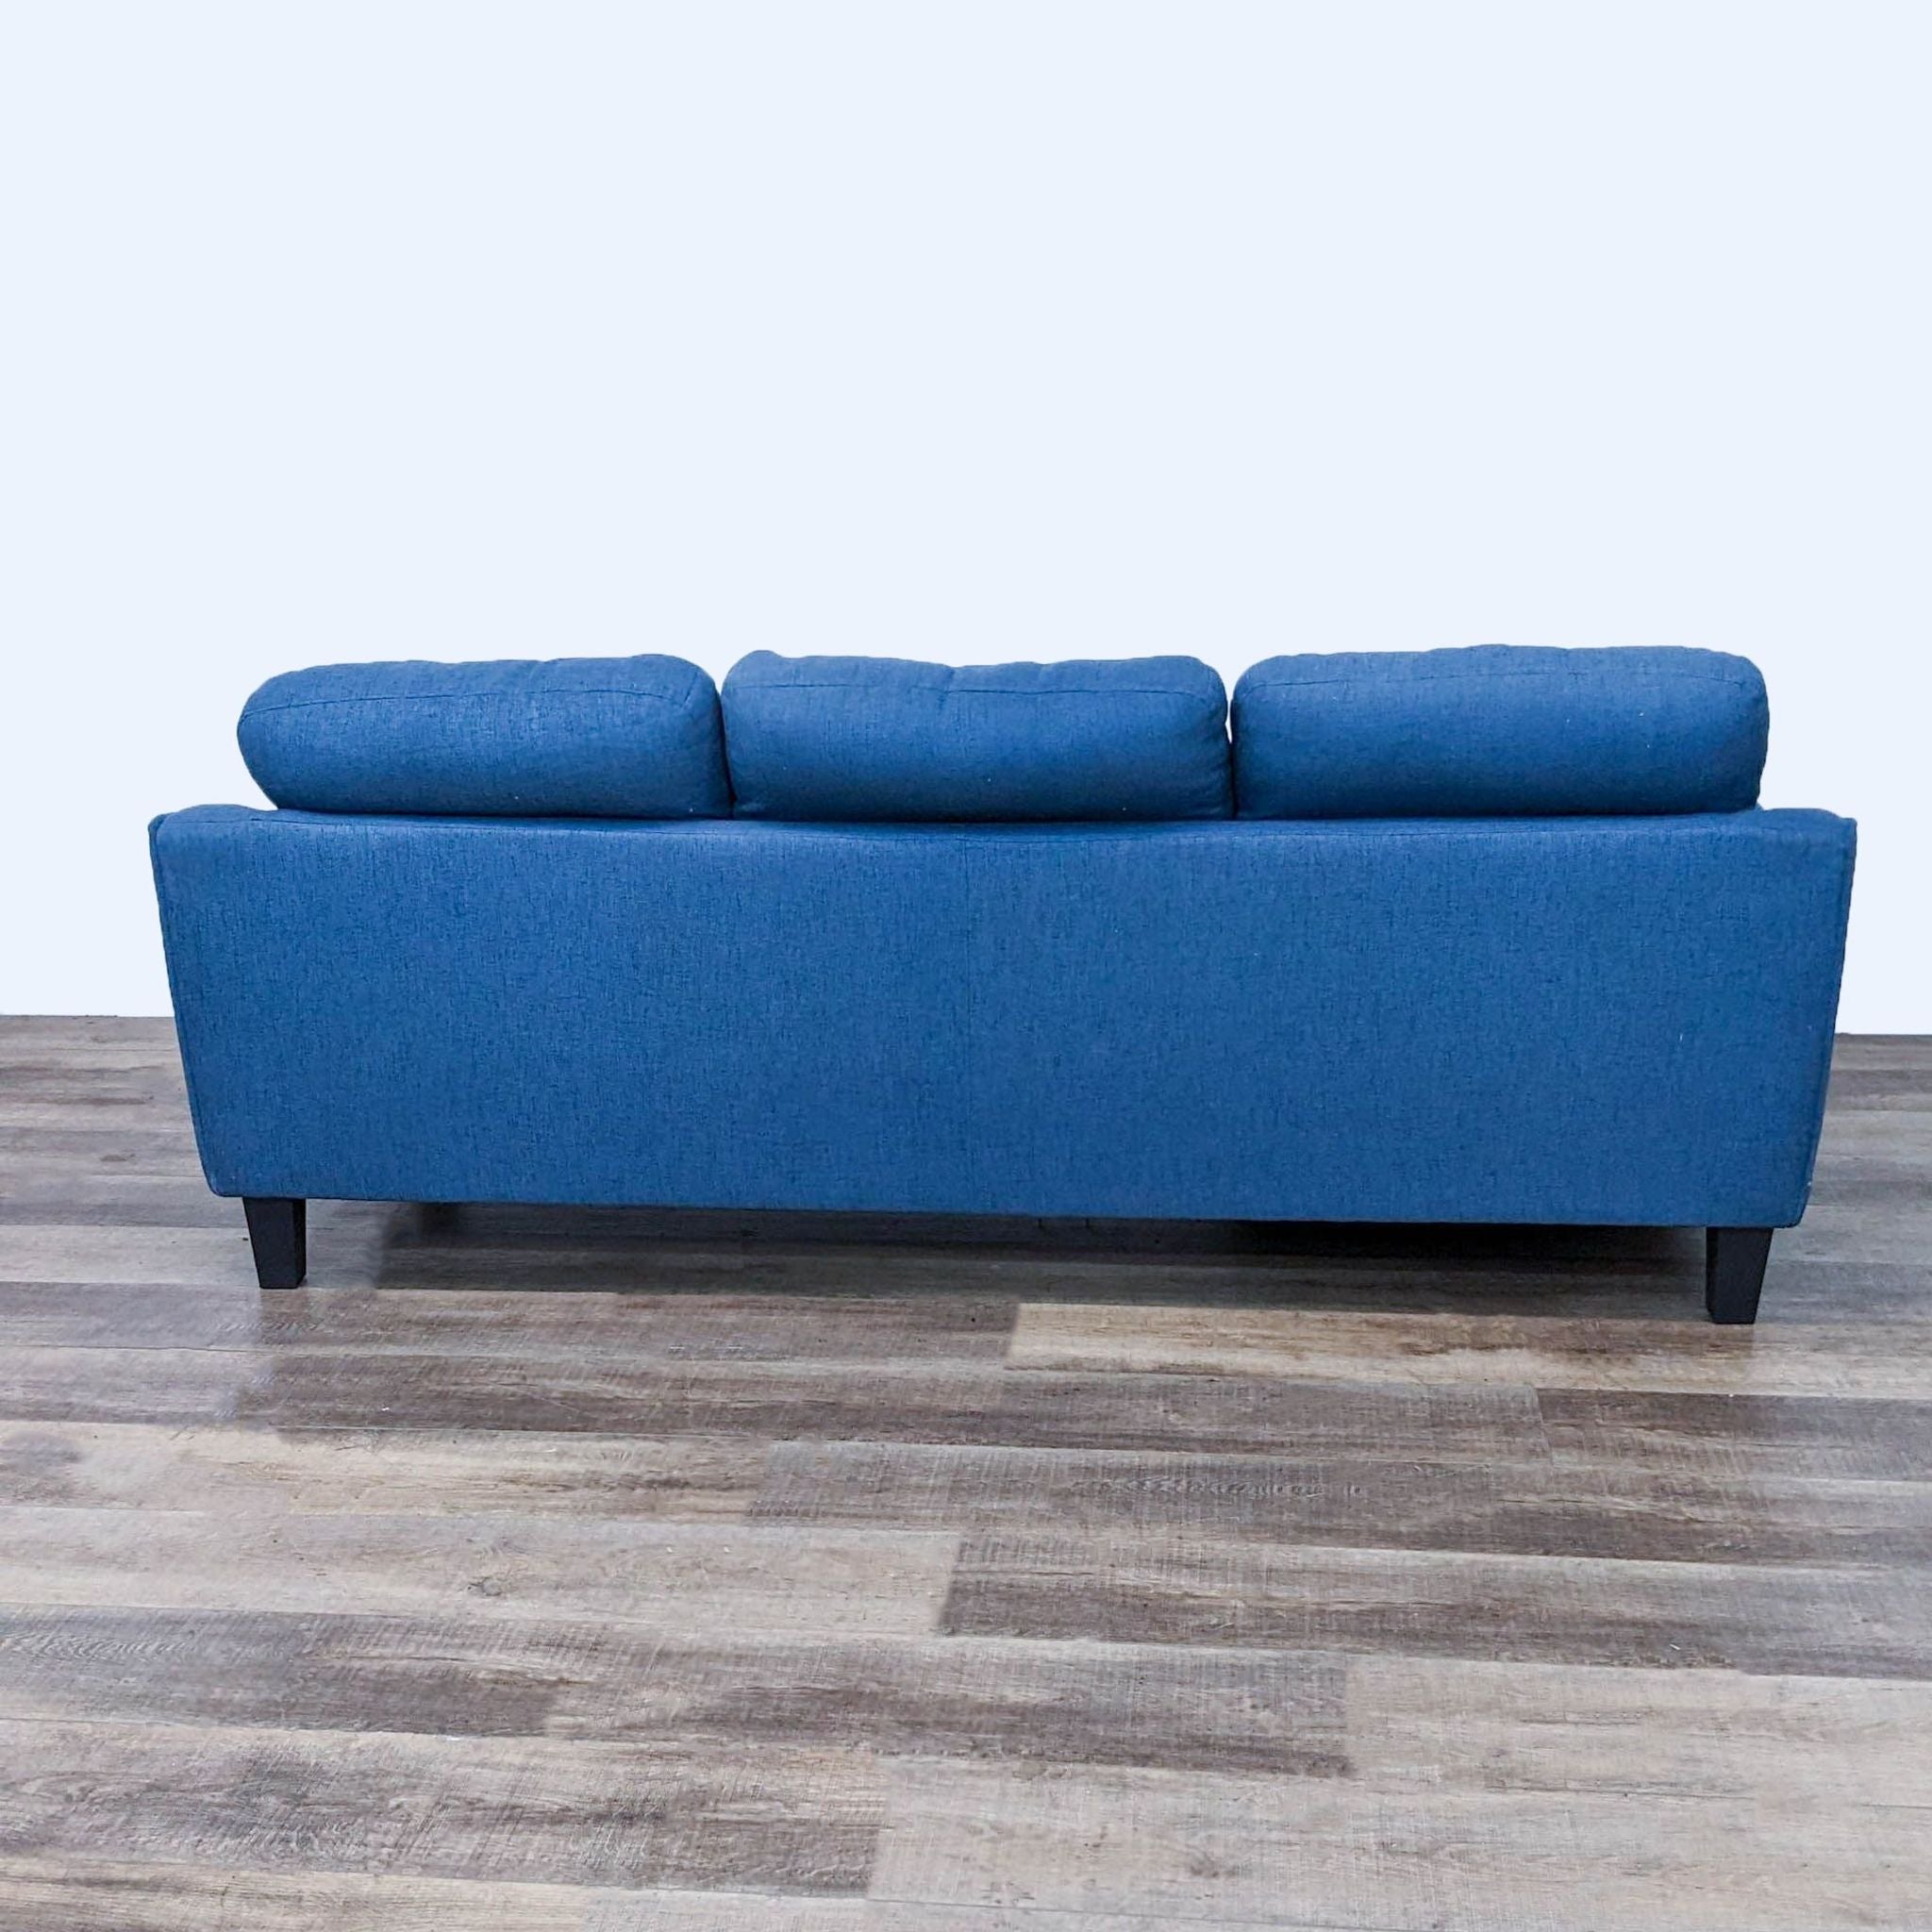 Blue Reperch sectional sofa with chaise and dark wood feet on wooden floor.